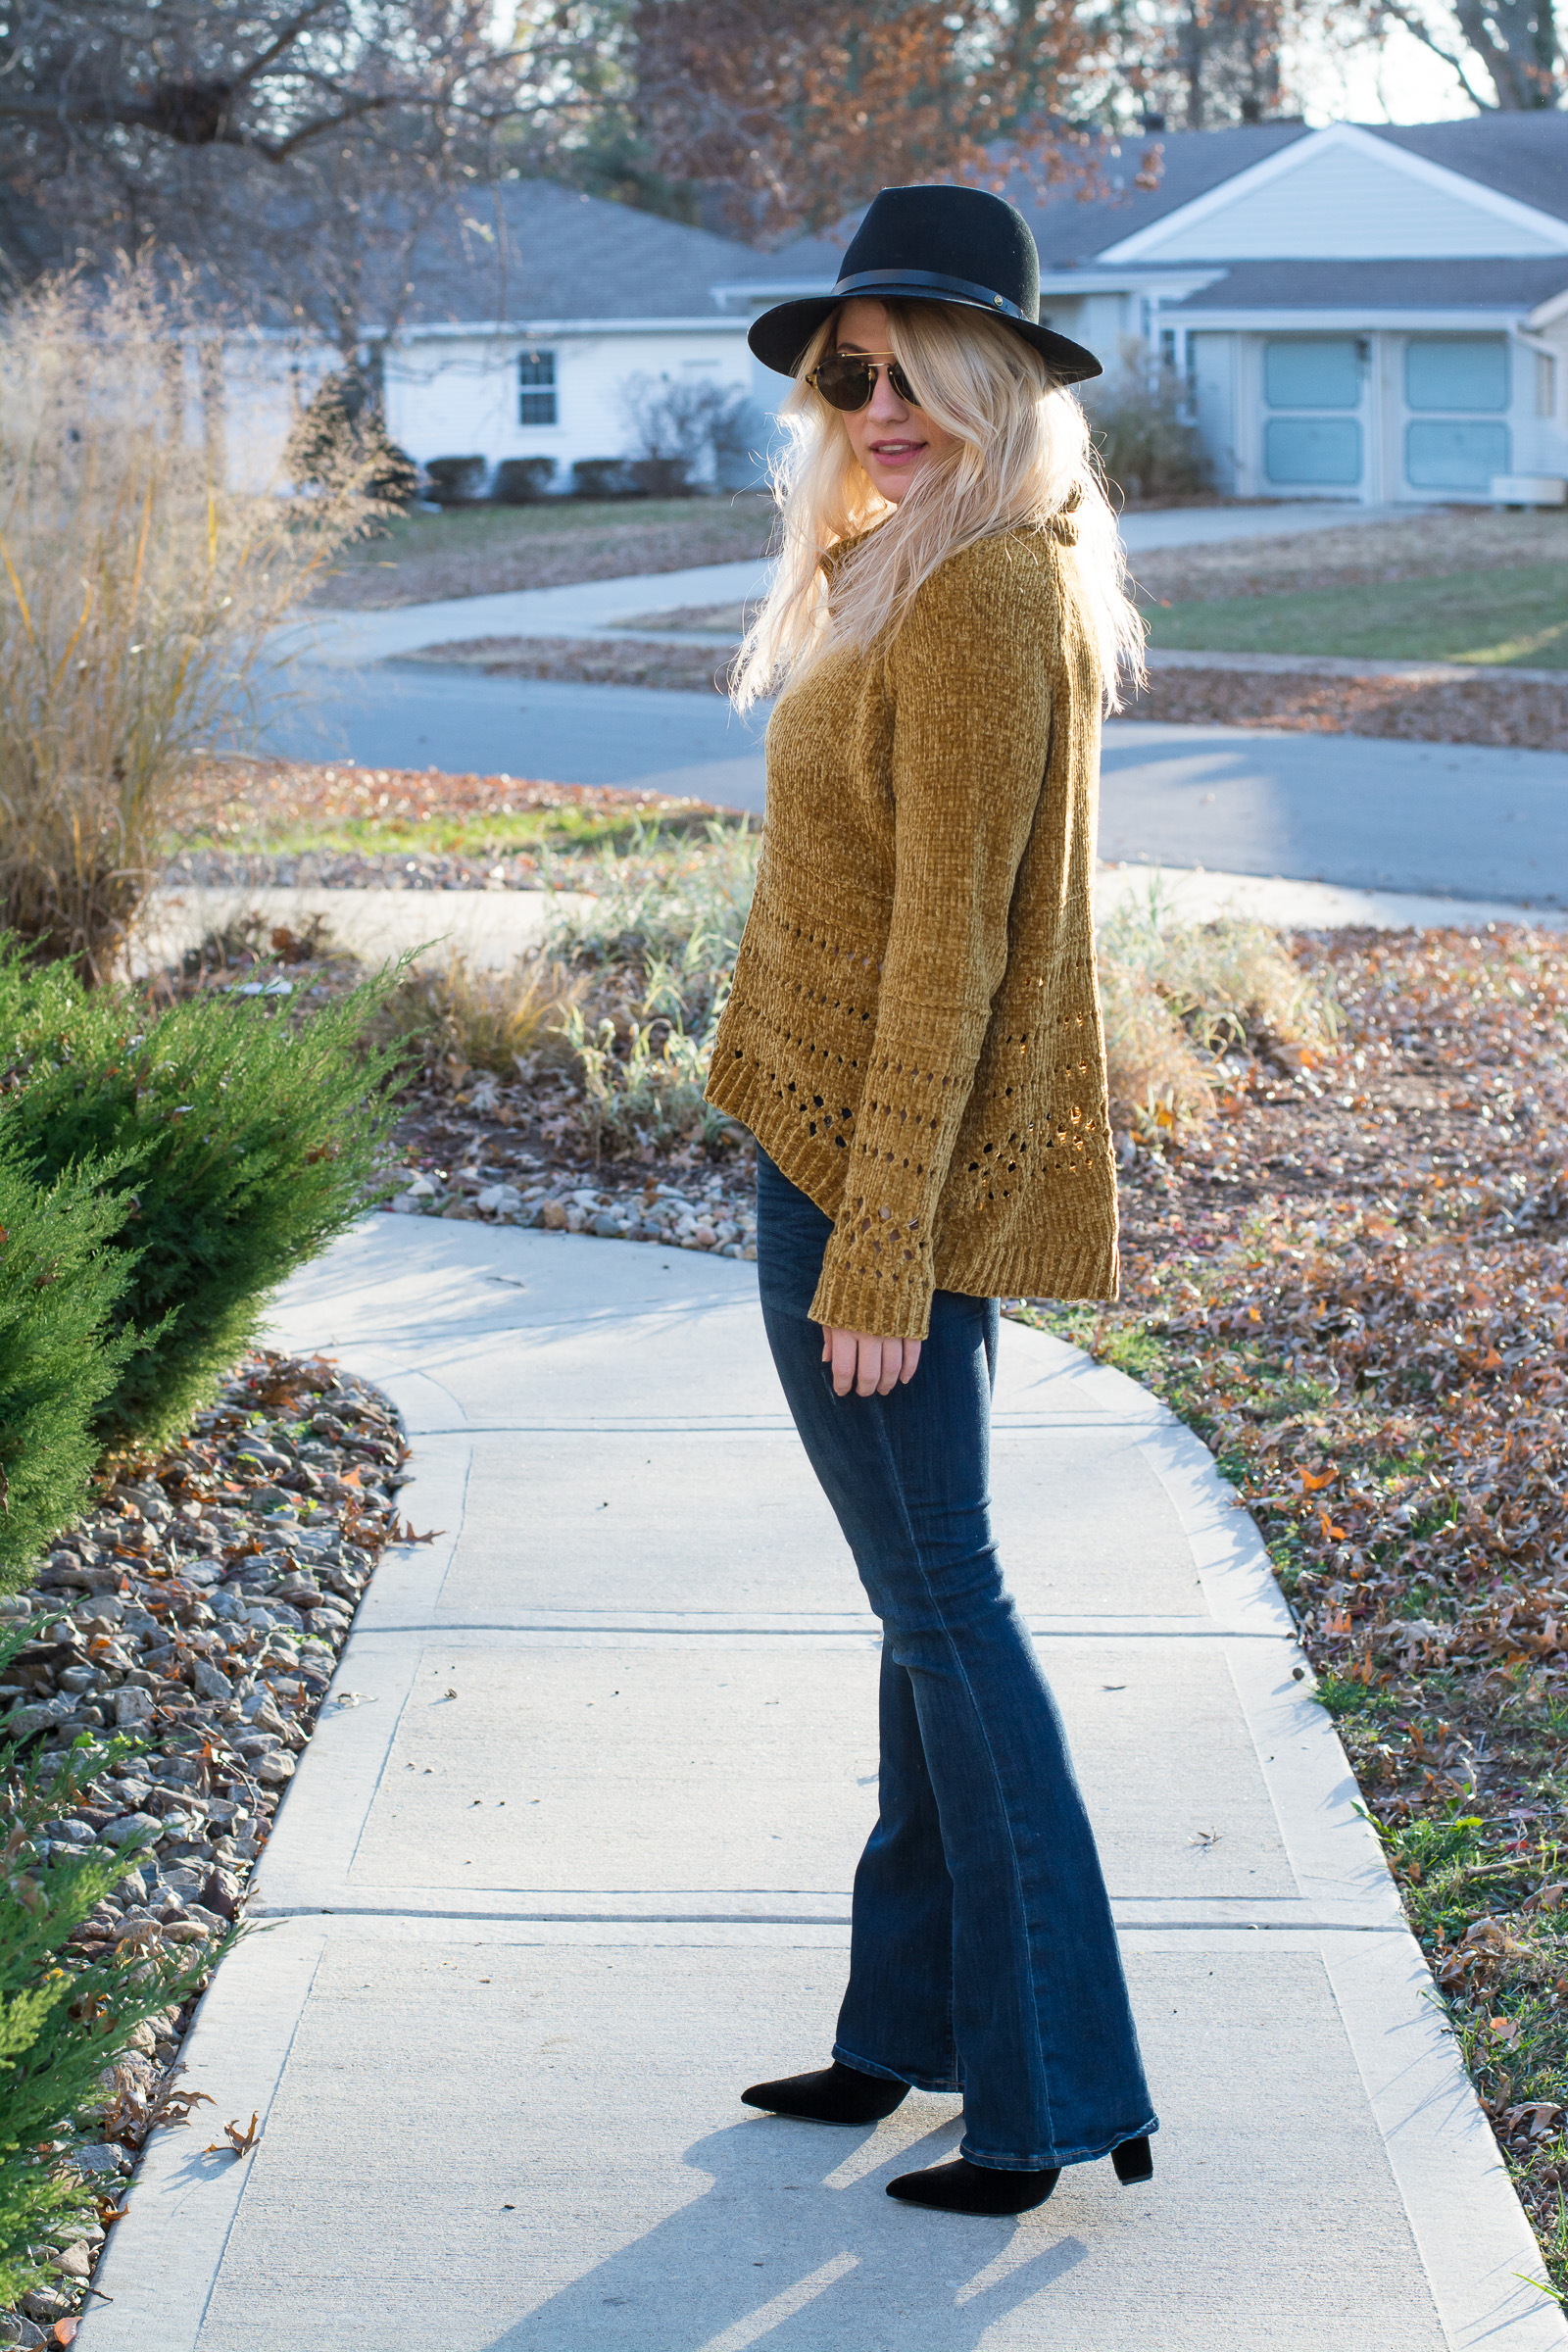 Fall Outfit: Mustard Chenille Sweater + Flares. | Ashley from LSR